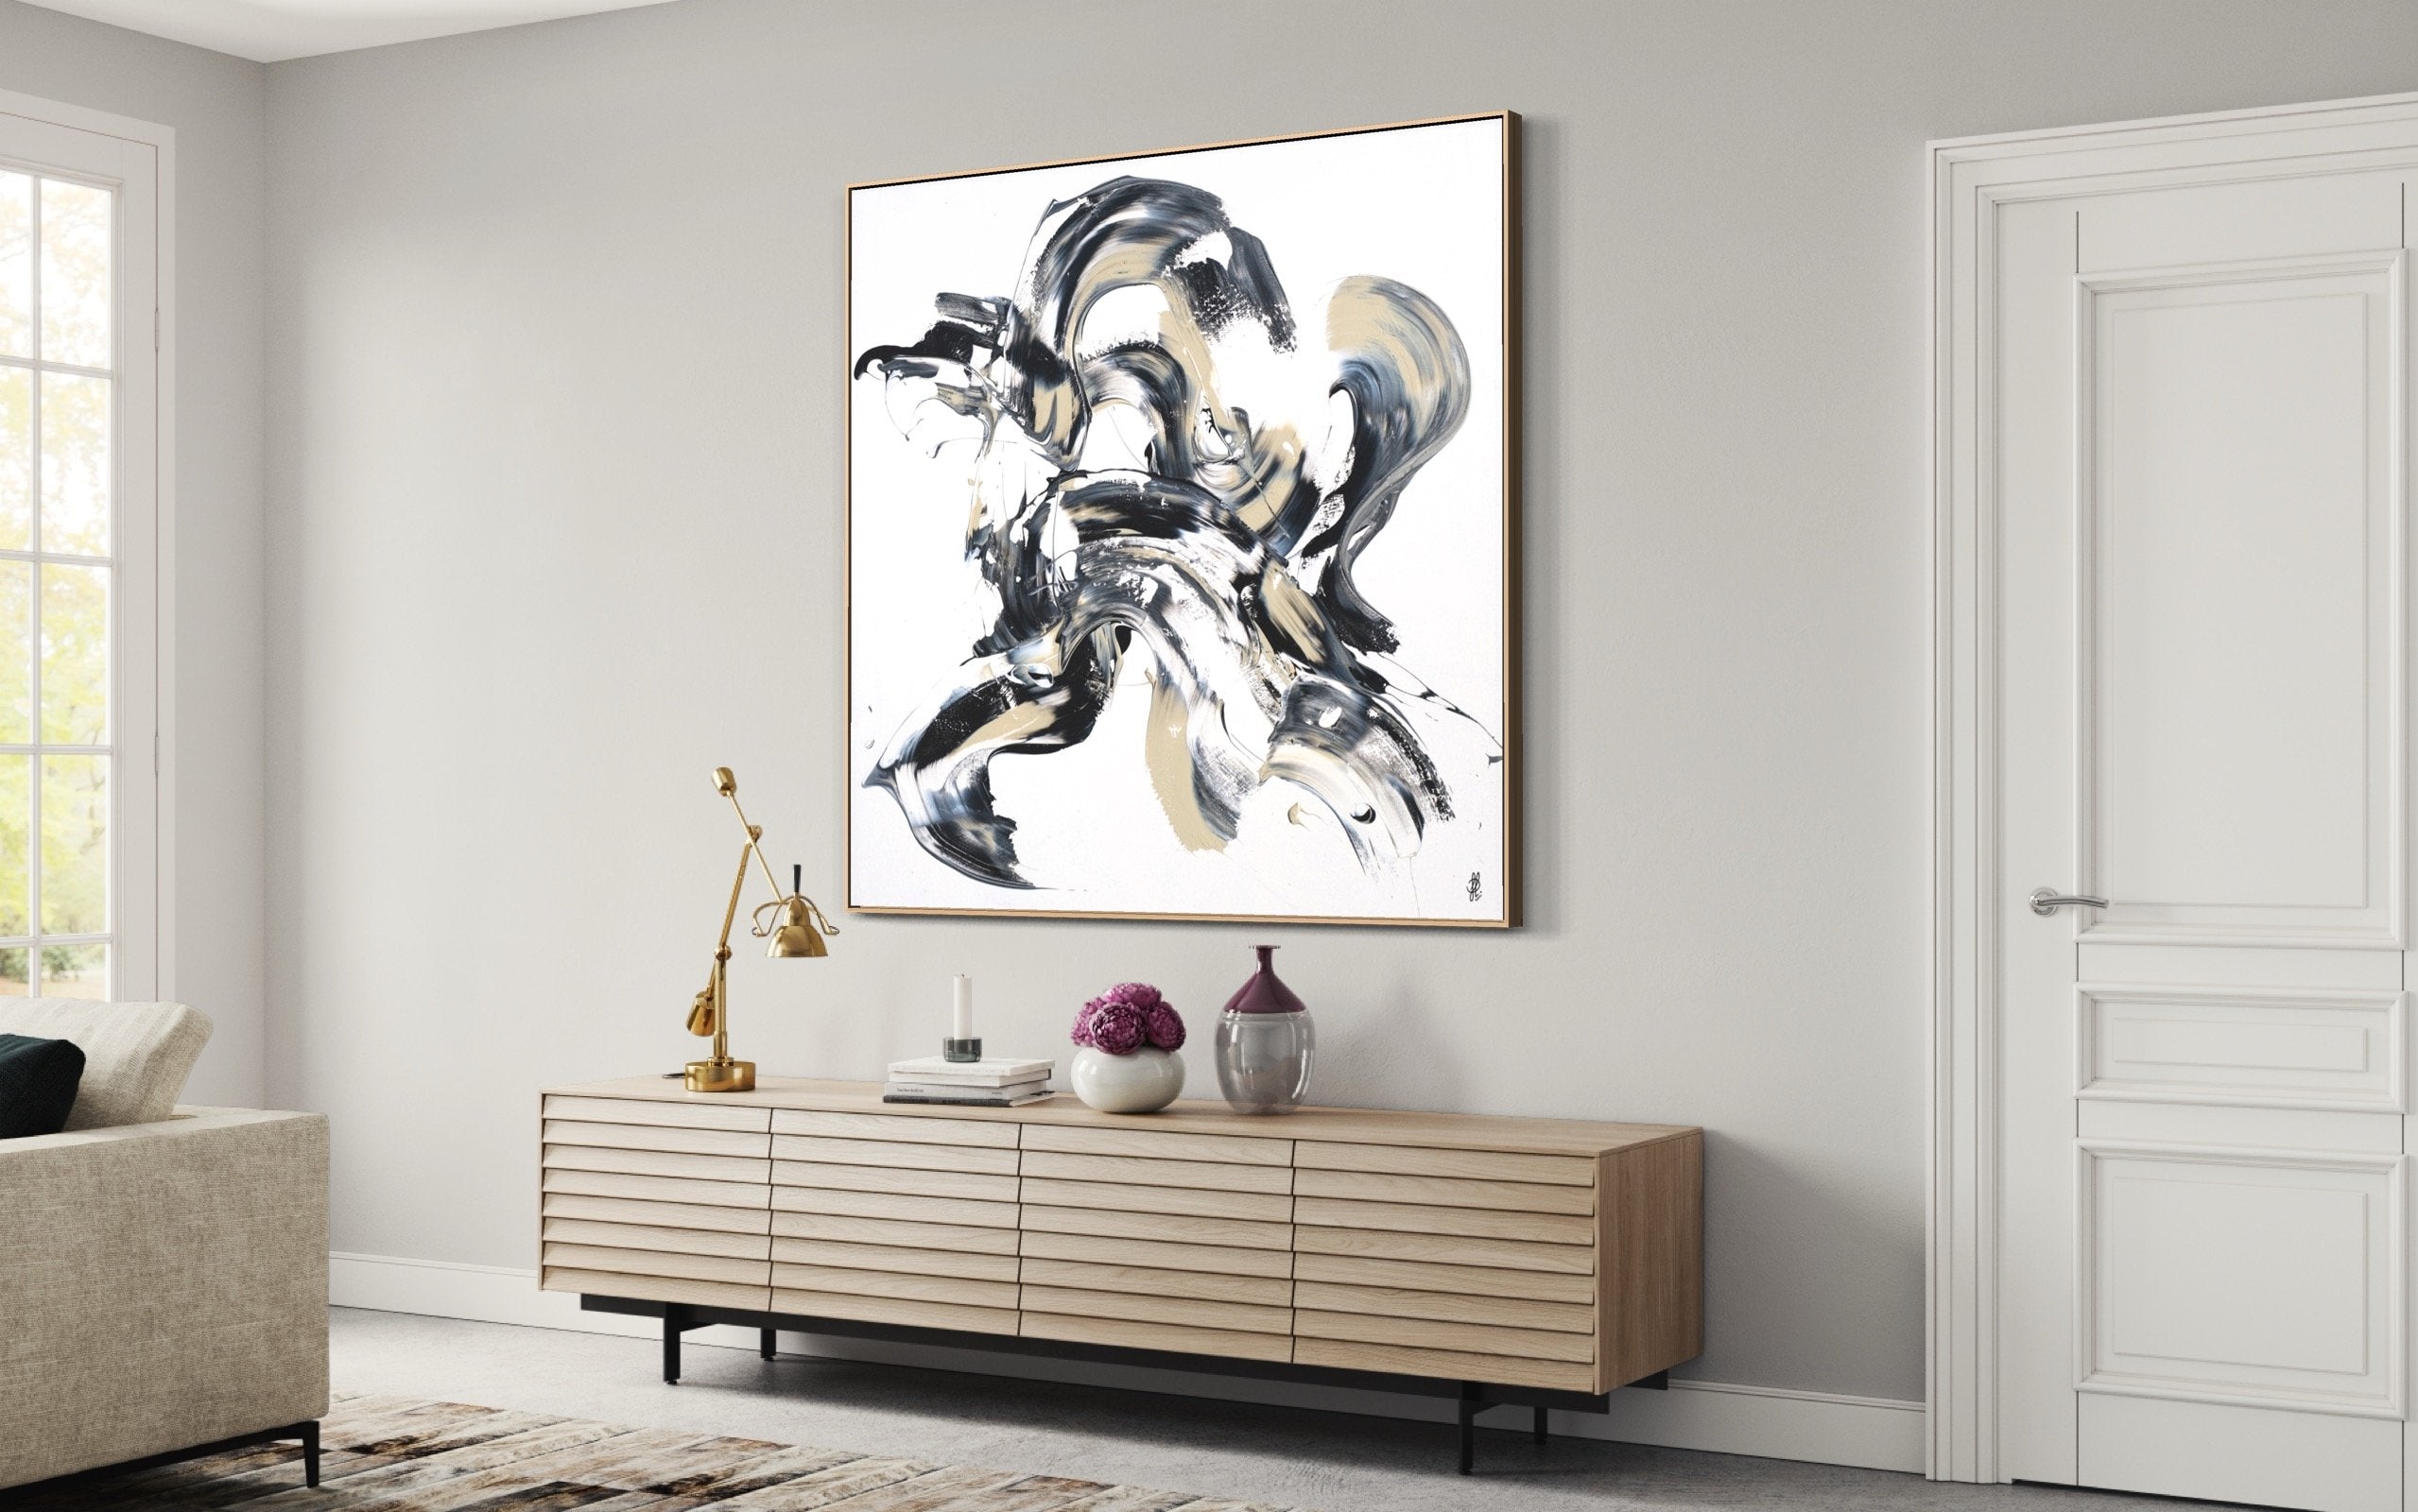 Canvas print: "Less Is More #4"